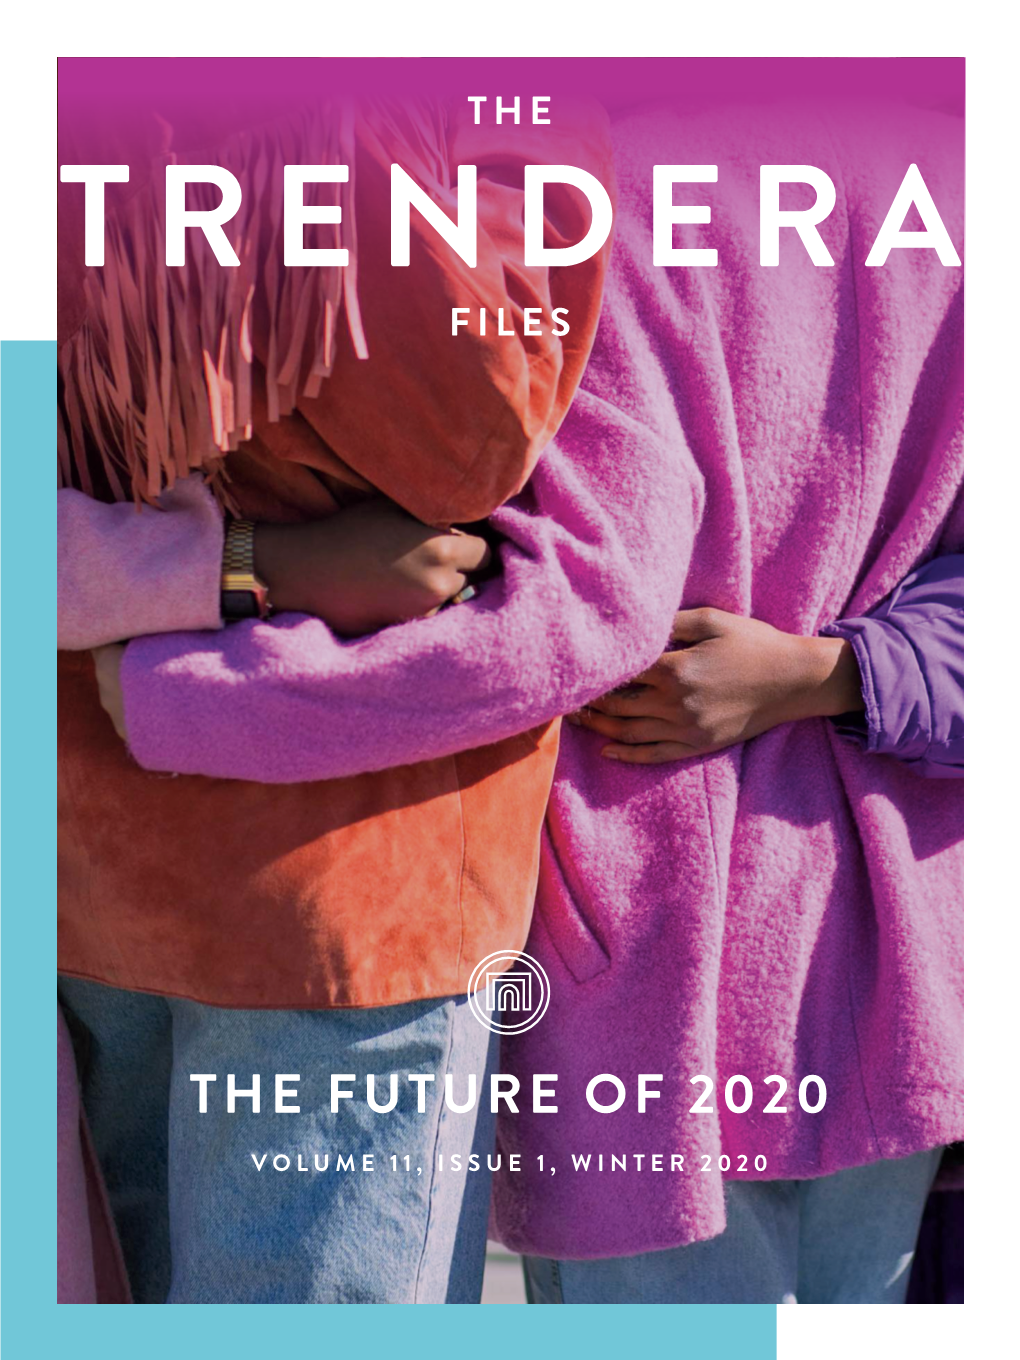 The Future of 2020 Volume 11, Issue 1, Winter 2020 the Trendera Files: the Future of 2020